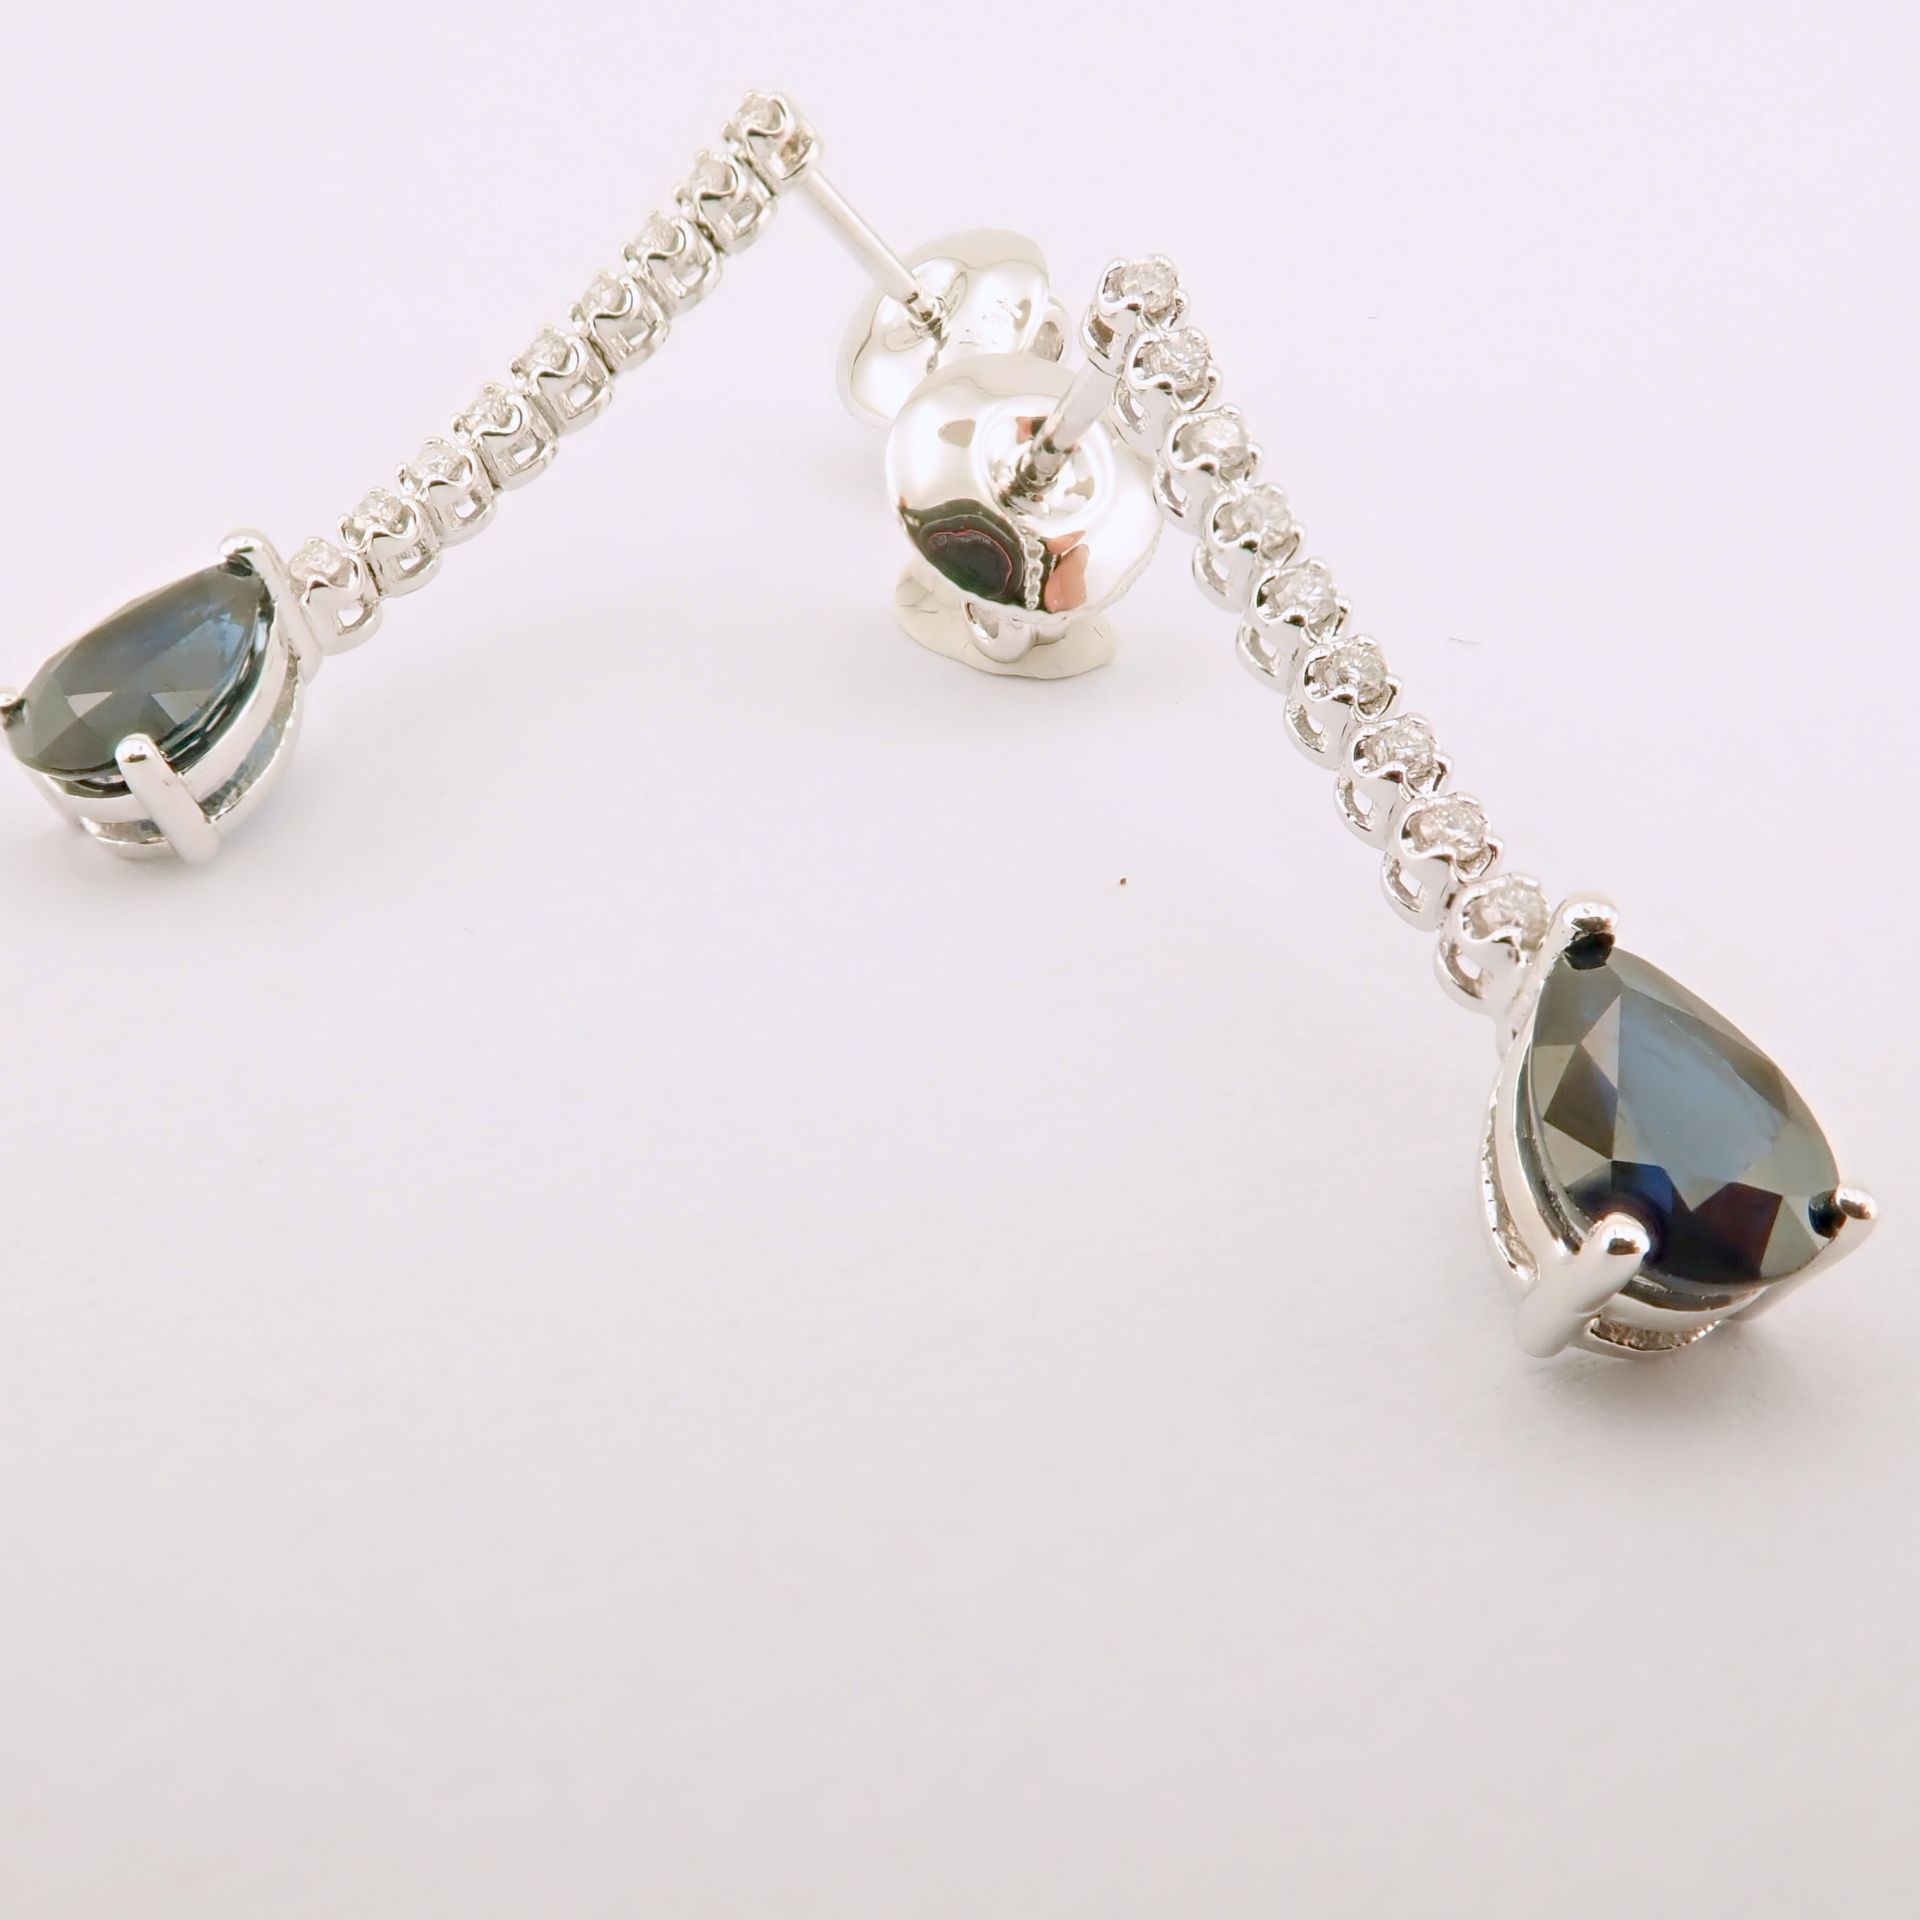 14K White Gold Diamond and Sapphire Earring - Image 2 of 7